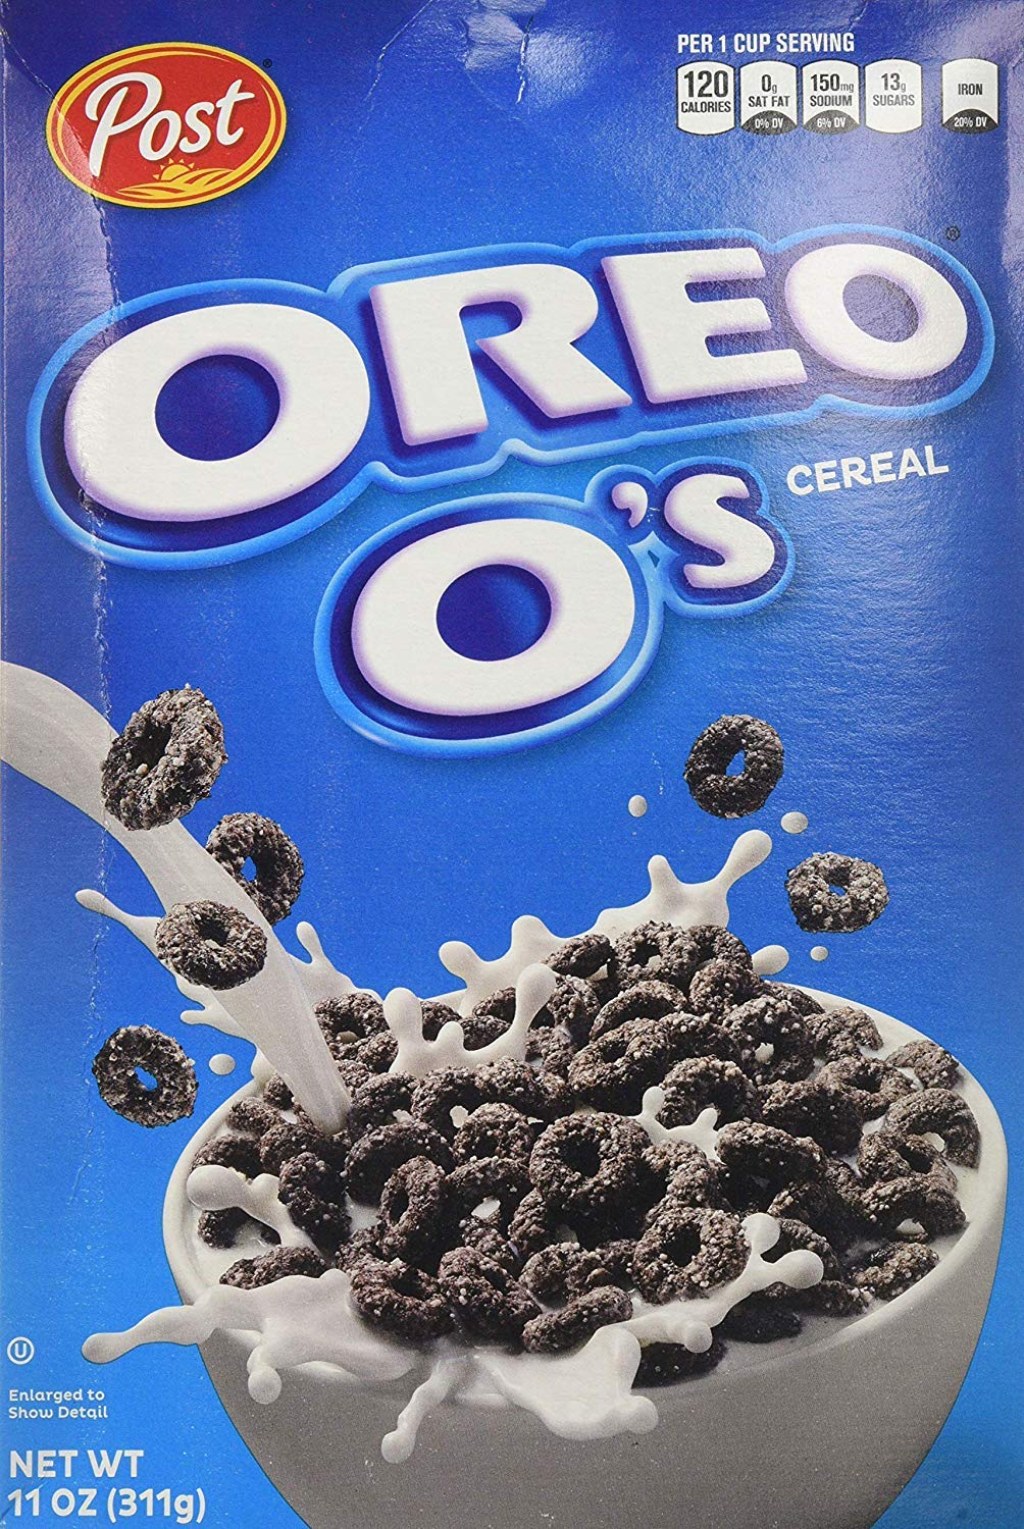 Picture of: Post Oreo O’s Cereal – American Cereal, Sweet and Crunchy Breakfast,  Chocolate Flavour – Box of , g Original Oreo Snack